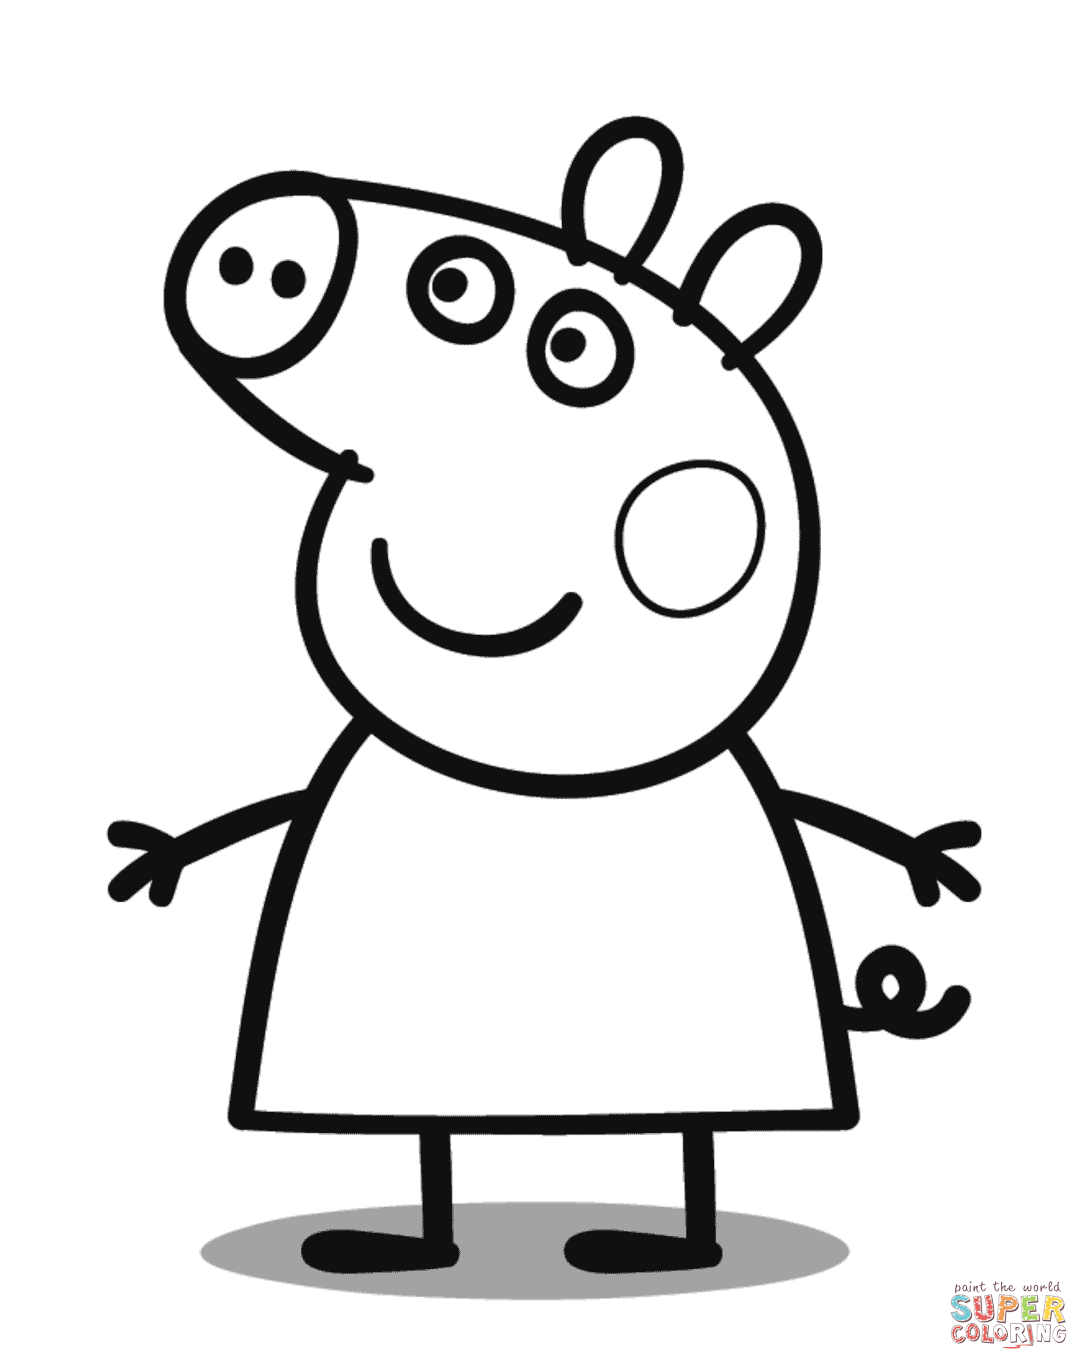 Peppa Pig Learning Coloring Page - Free Printable Coloring Pages for Kids